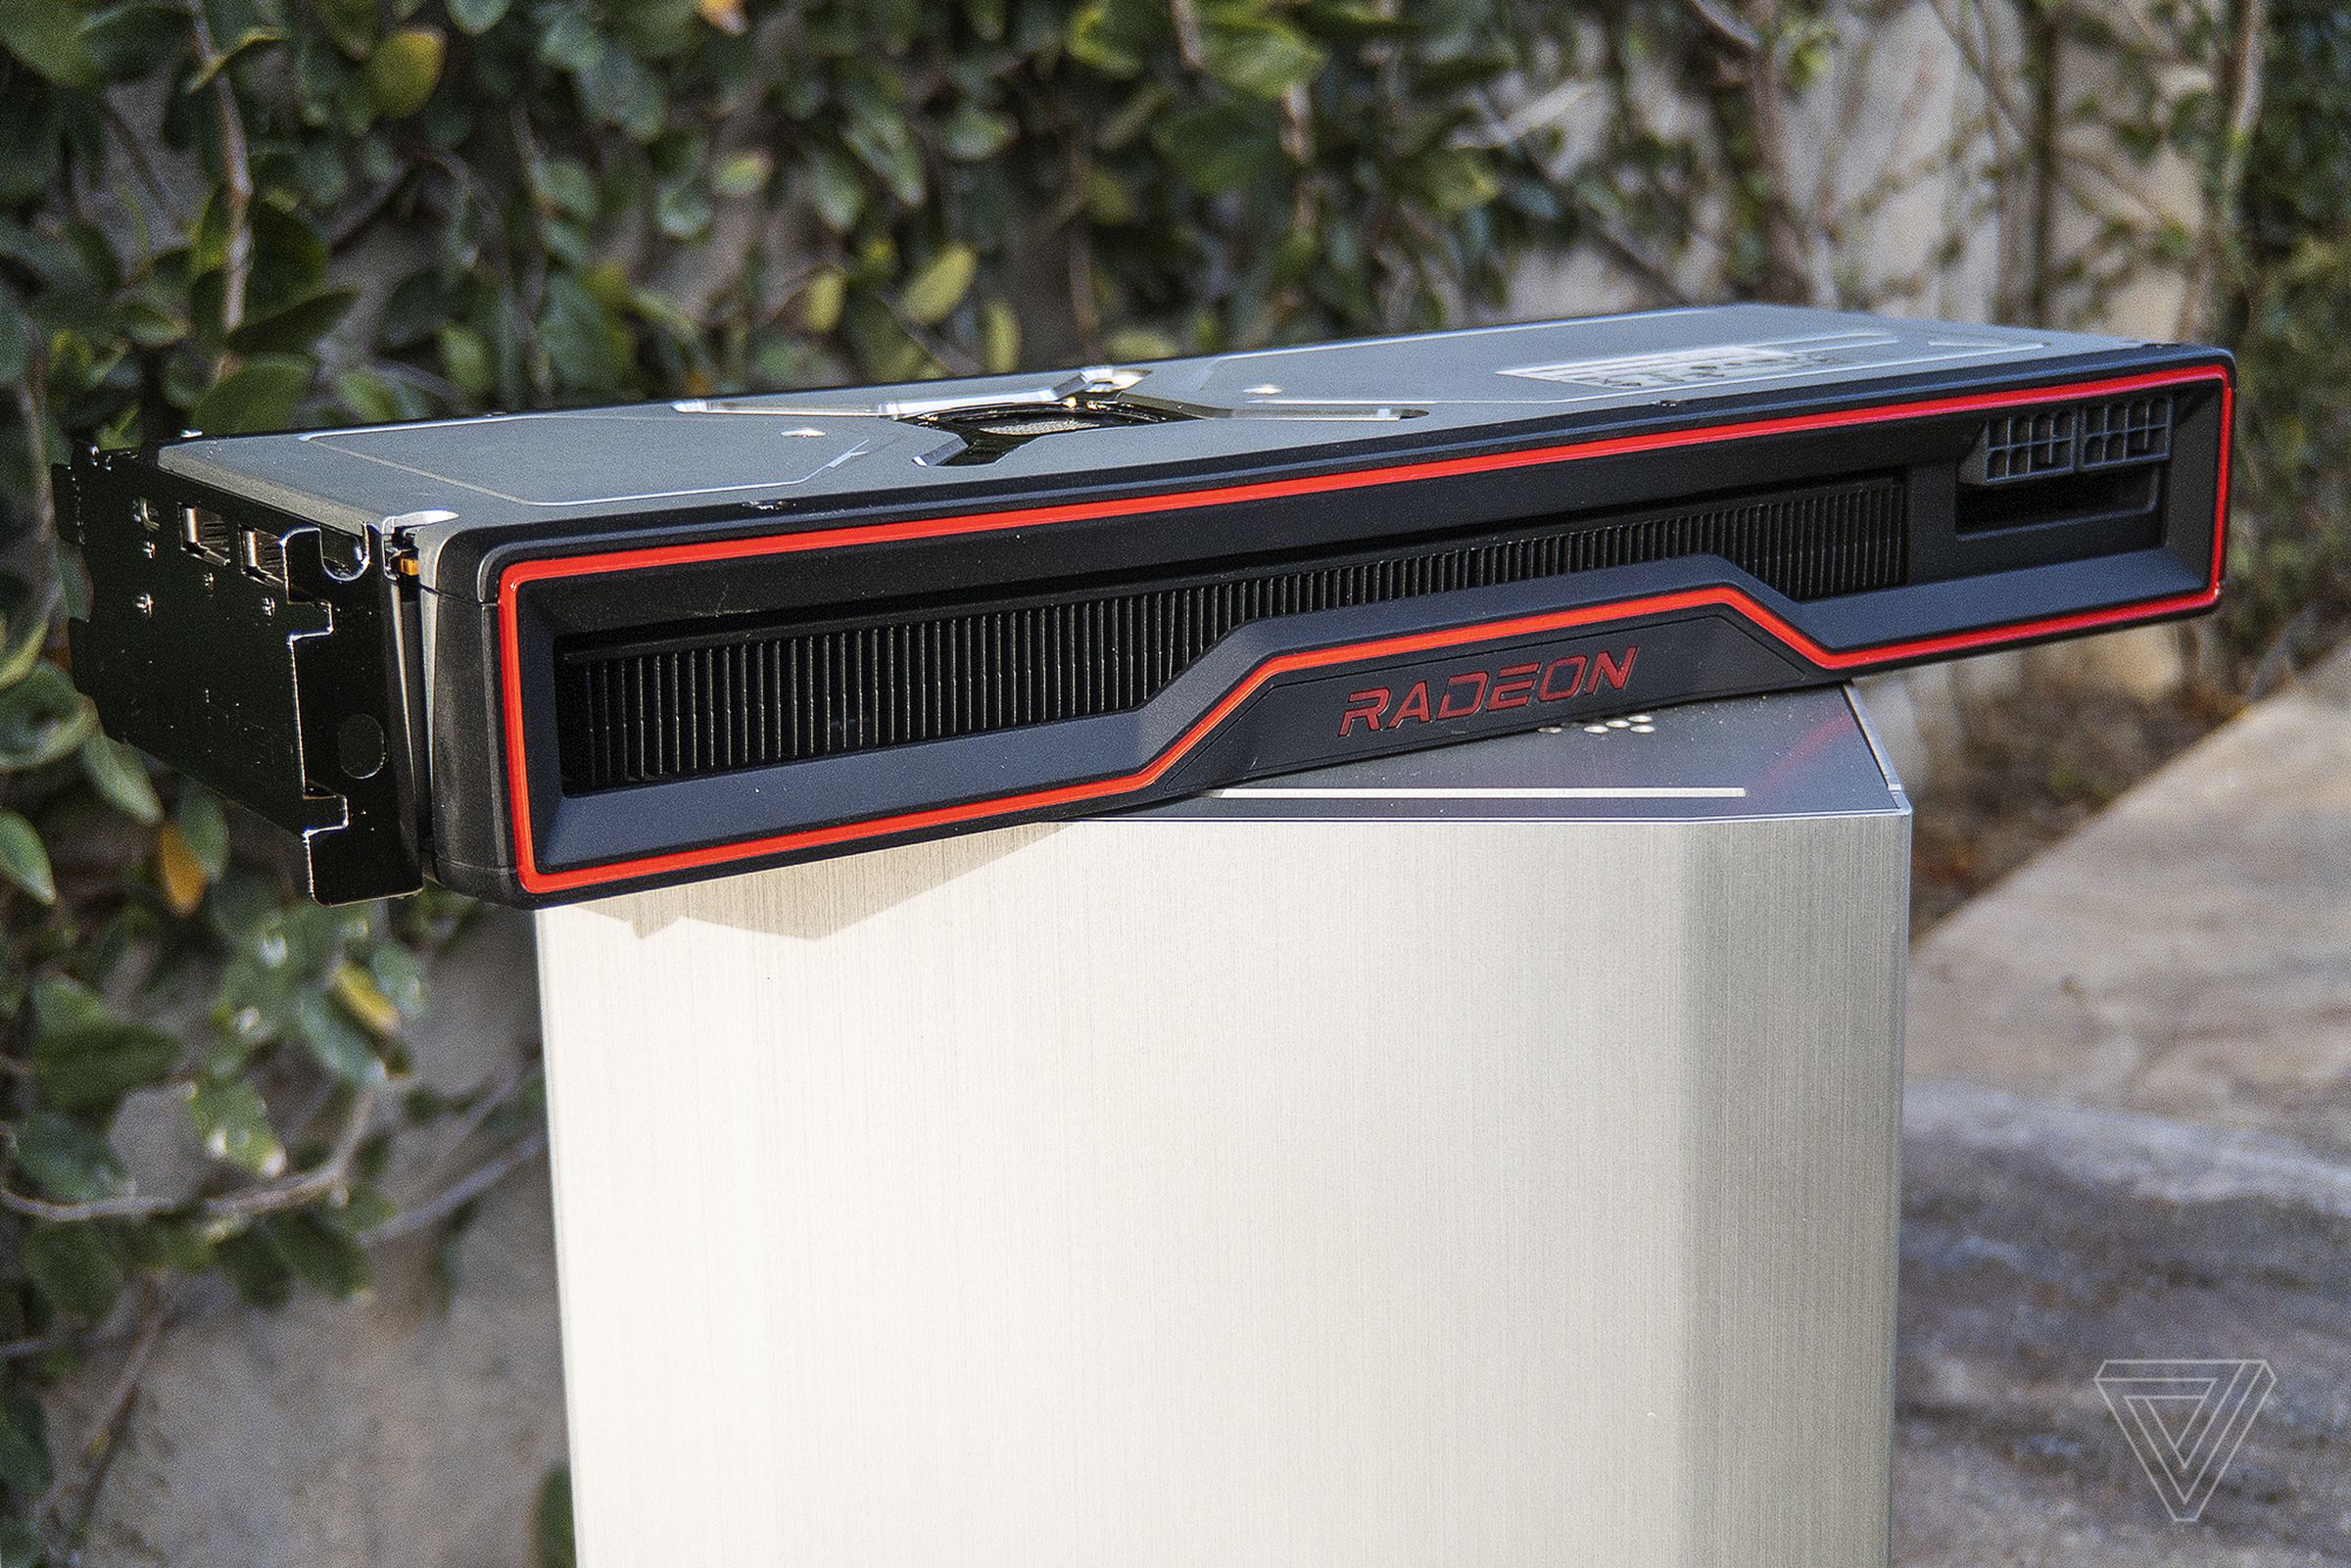 Yes, the RX 6800’s exhaust resembles a certain muscle car.